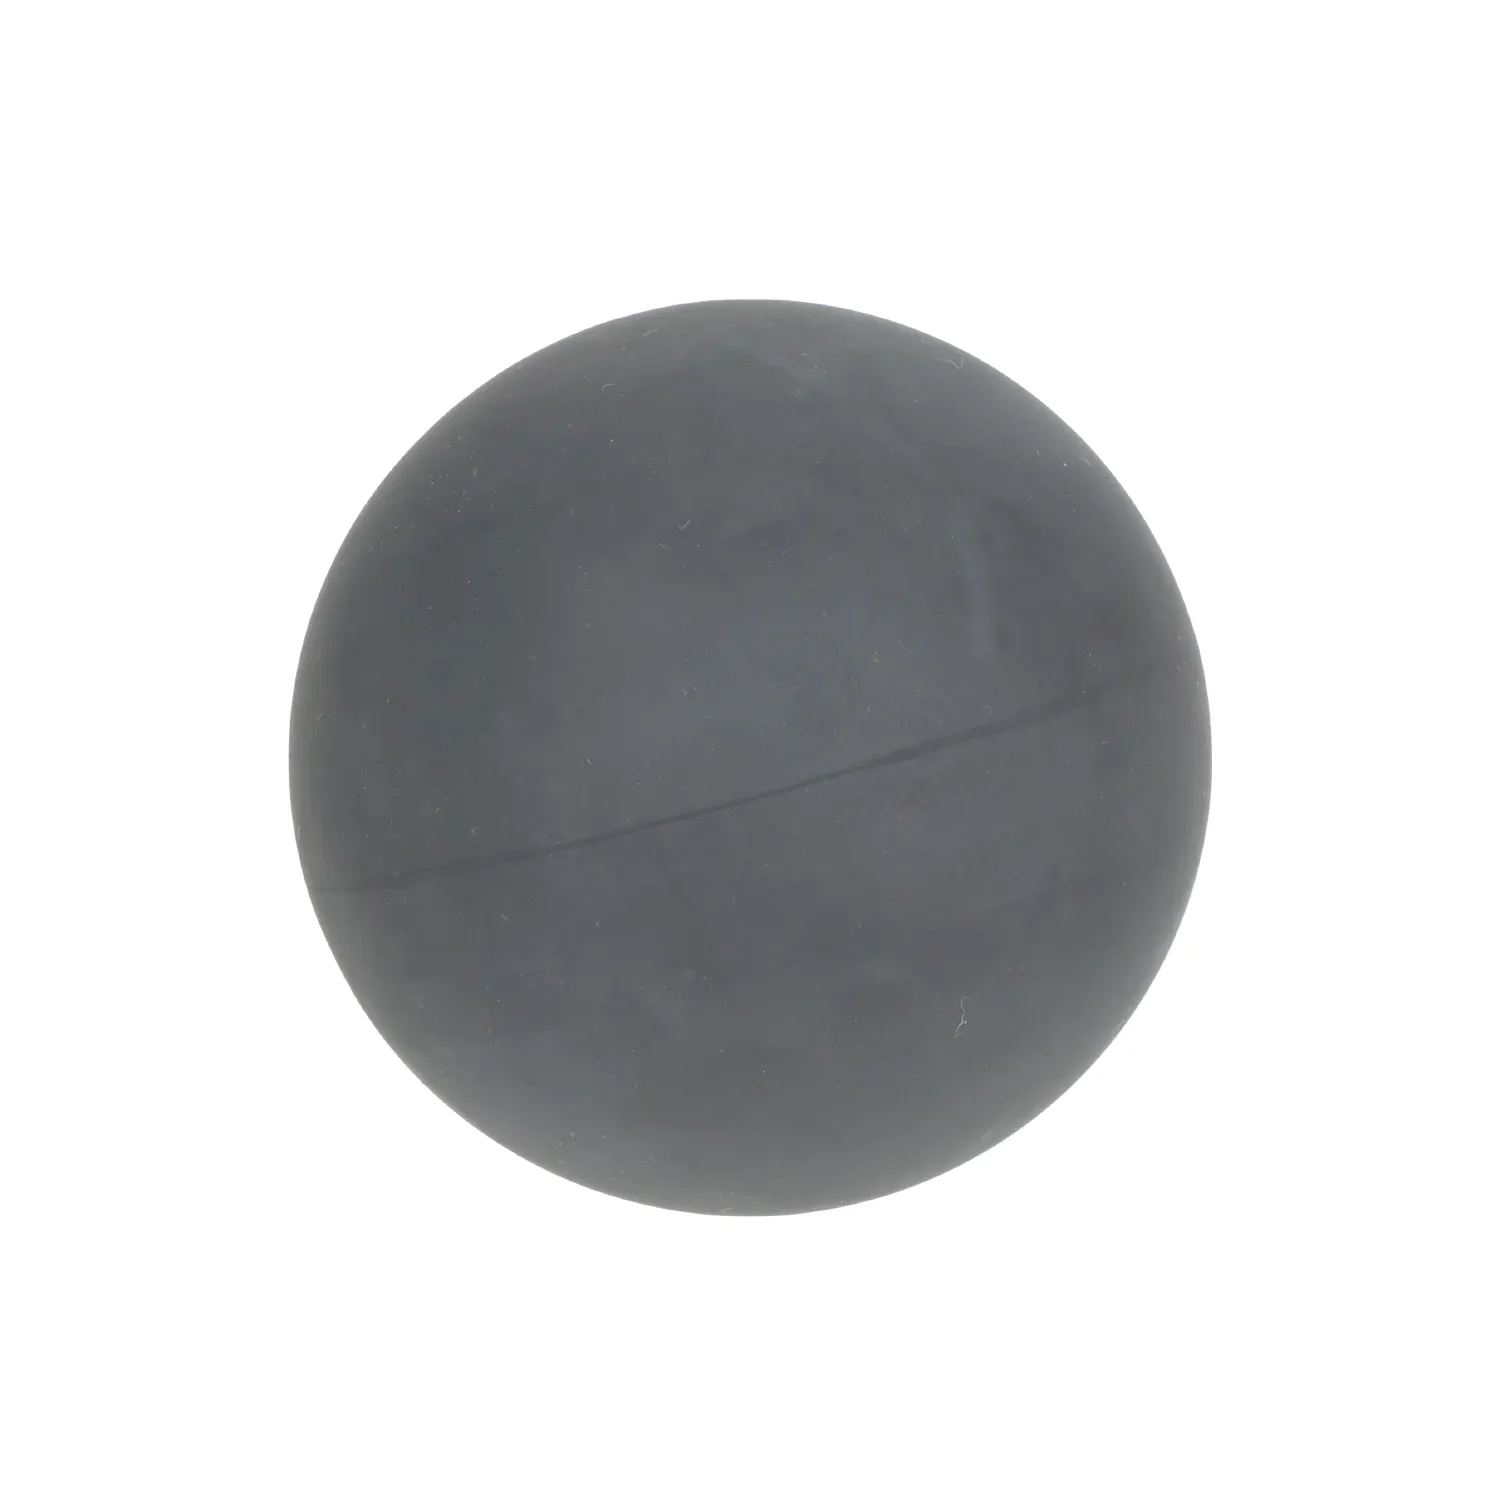 High quality custom mold seamless solid rubber ball with rubber to metal bonding for other rubber parts manufacturer Shenzhen